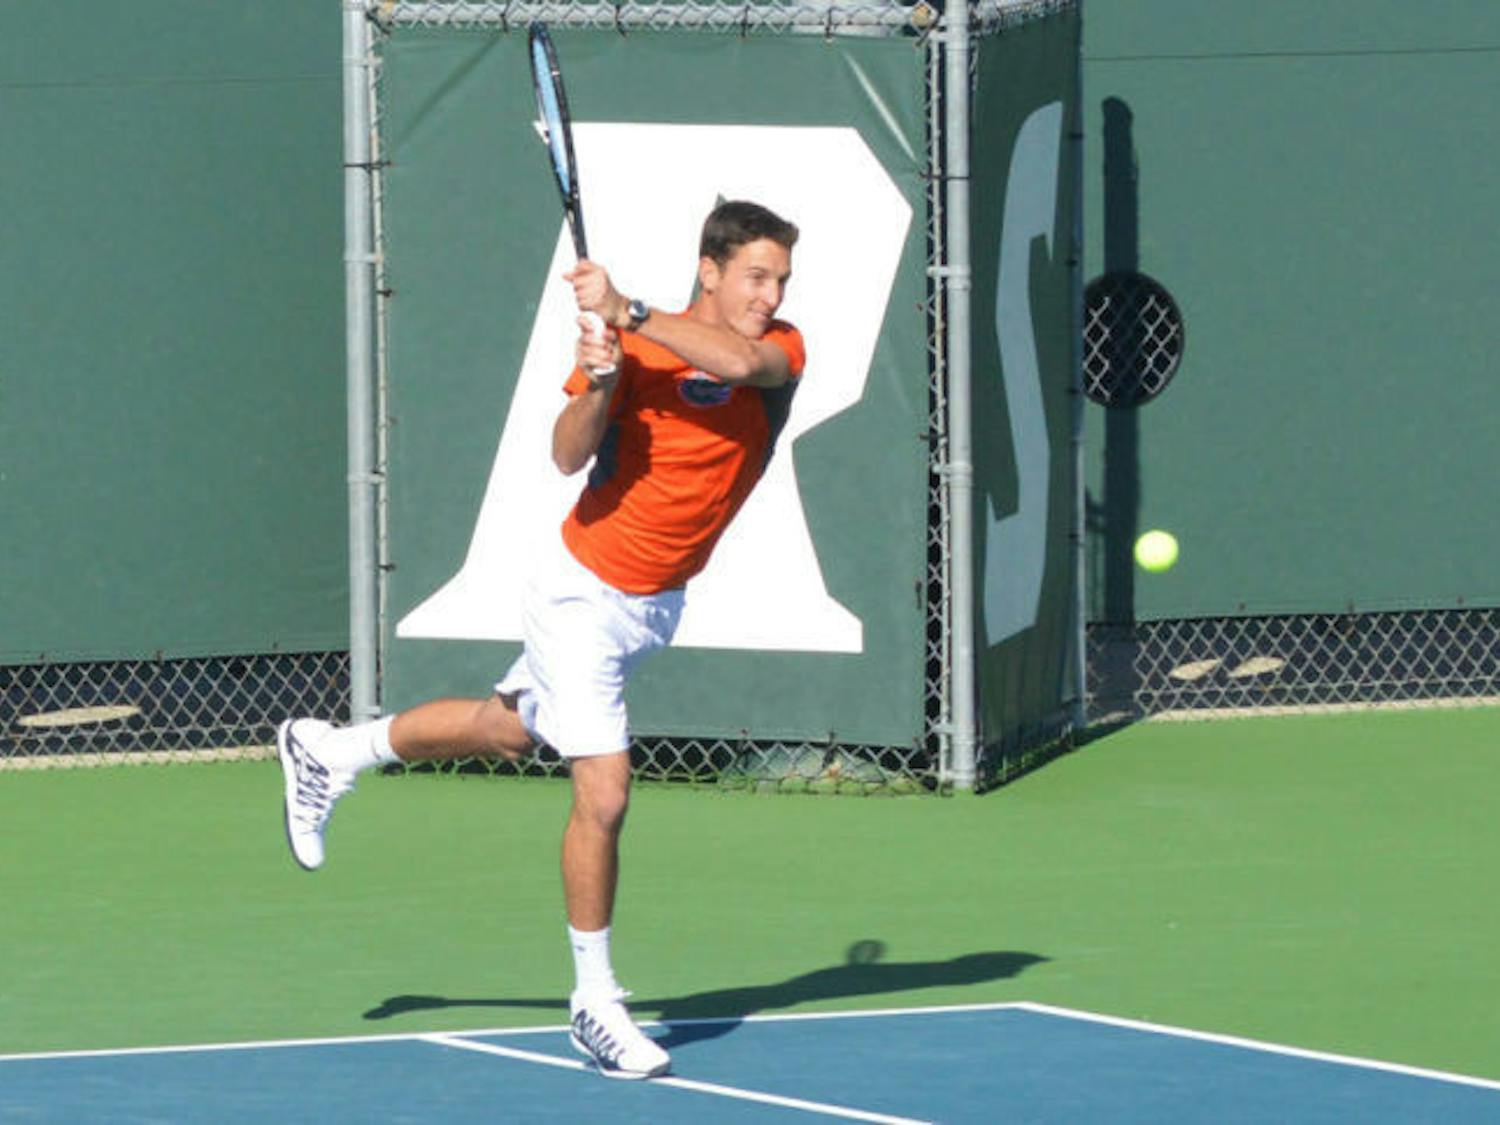 Gordon Watson returns a ball during Florida’s 5-2 win against North Florida on Jan. 22 at the Ring Tennis Complex.